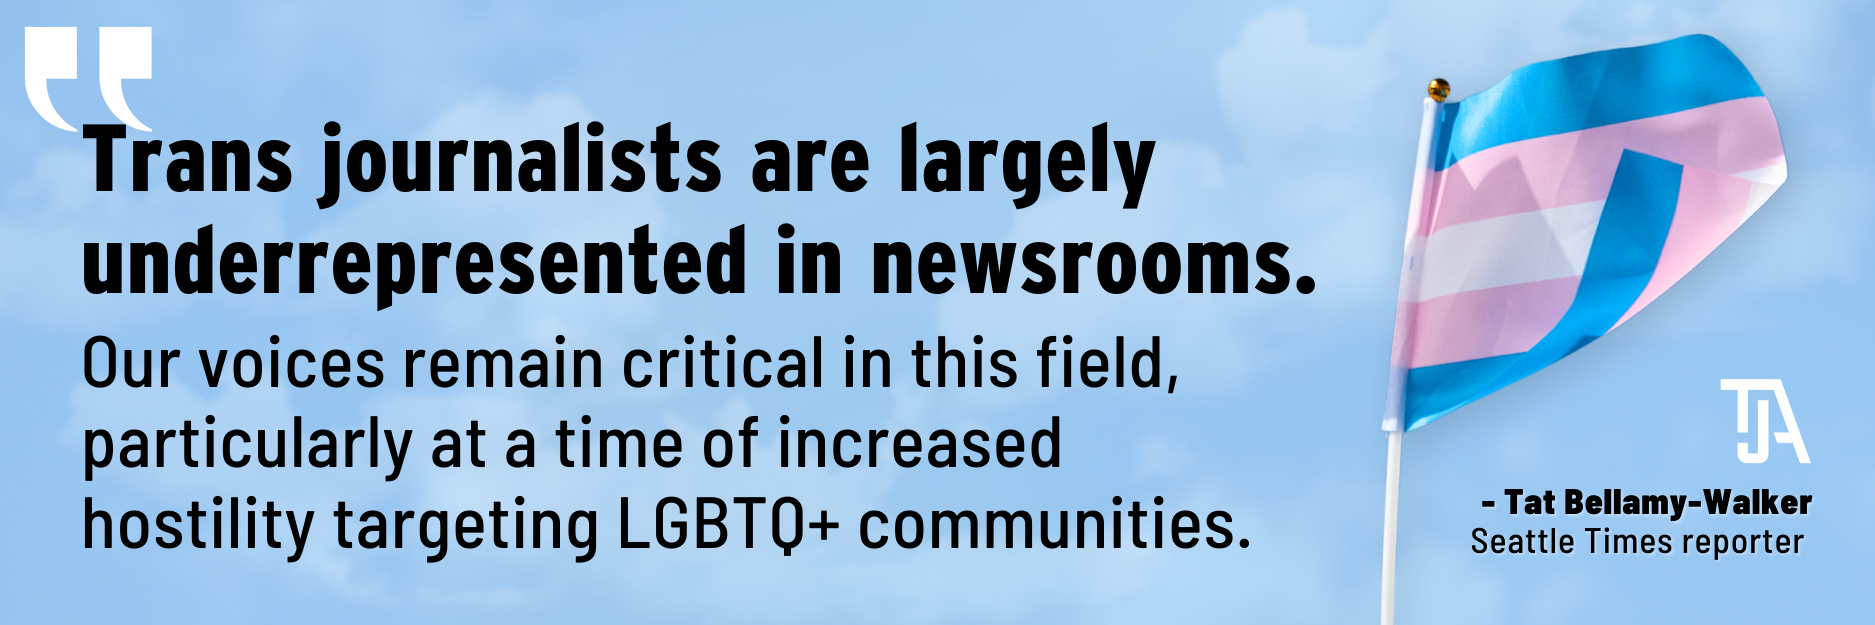 Trans journalists are largely underrepresented in newsrooms. Our voices remain critical in this field, particularly at a time of increased hostility targeting LGBTQ+ communities. Tat Bellamy-Walker, Seattle Times reporter